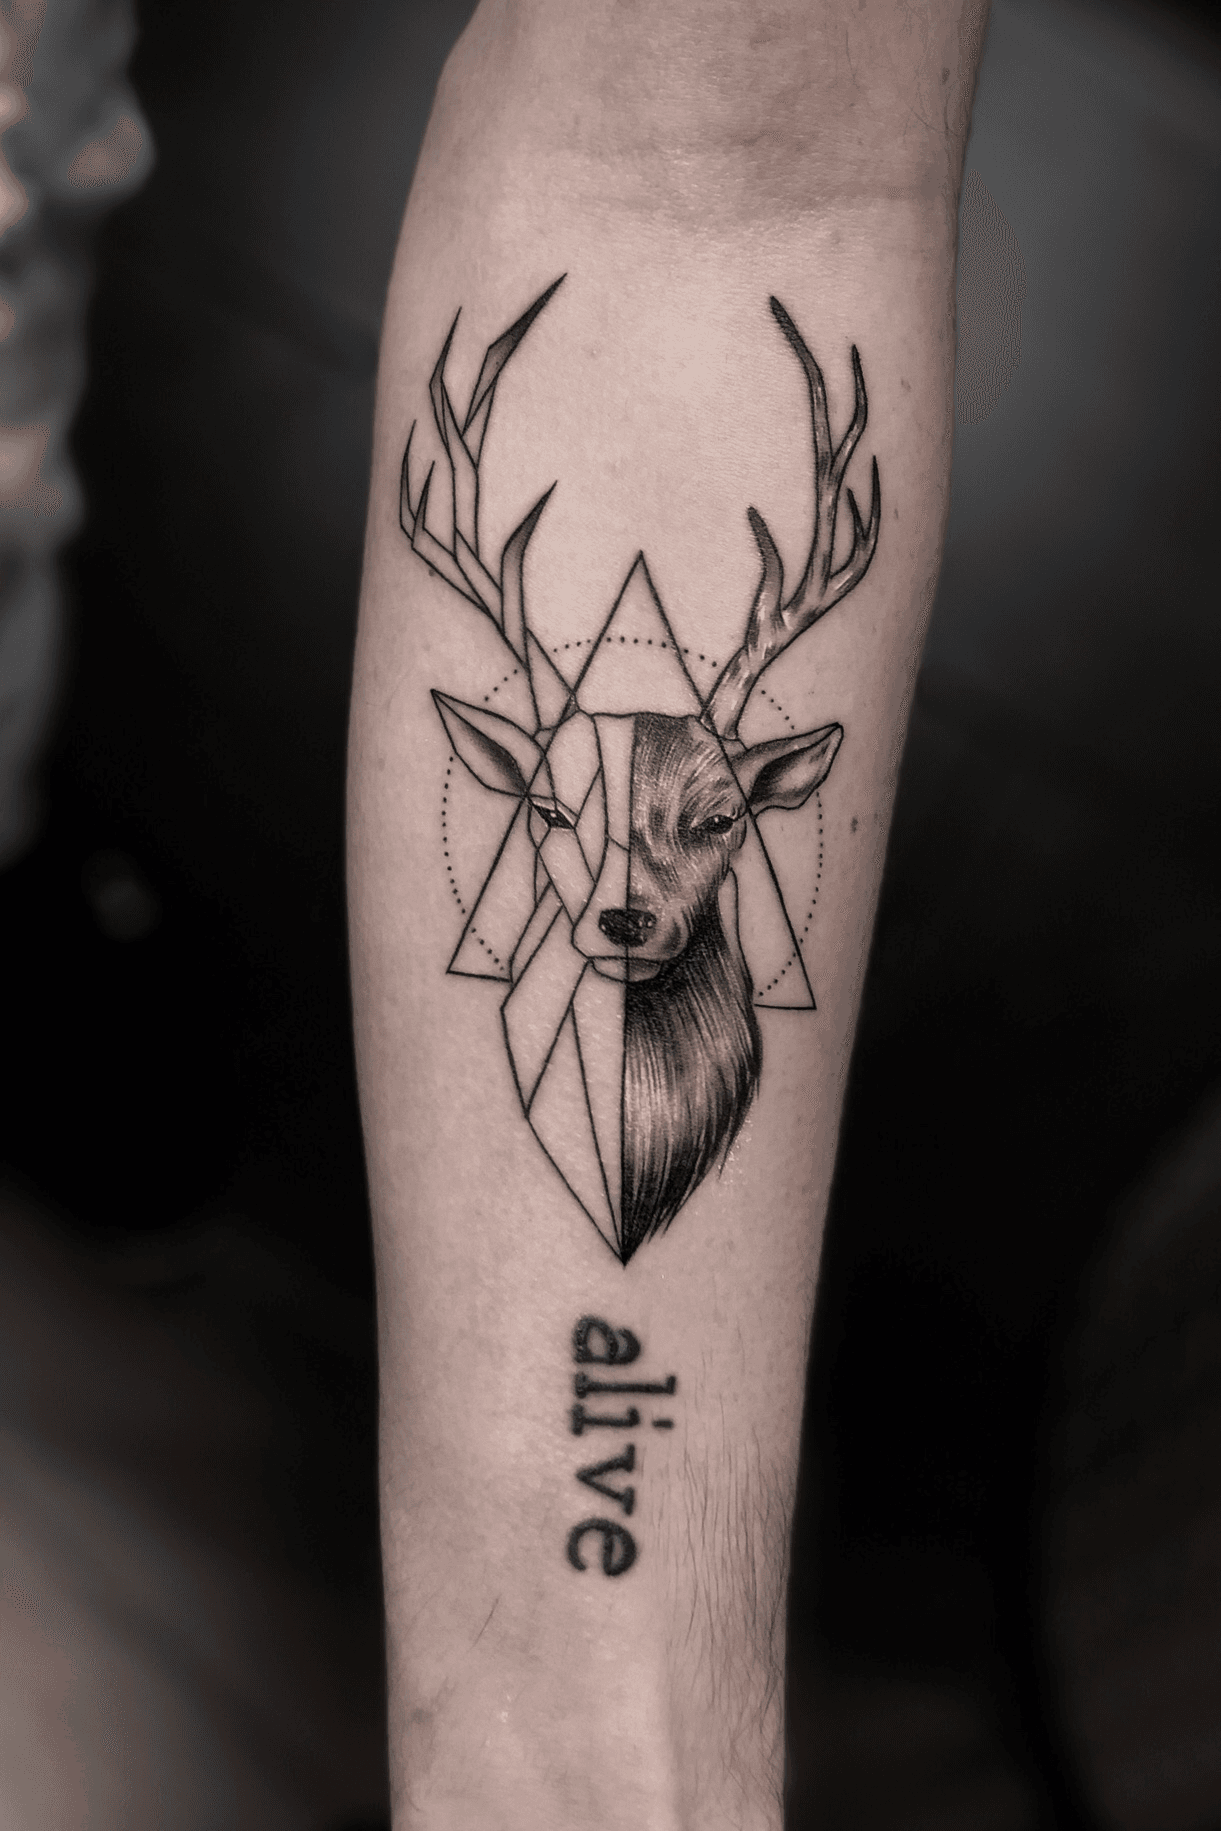 Forearm BlackGrey Deer tattoo at theYoucom